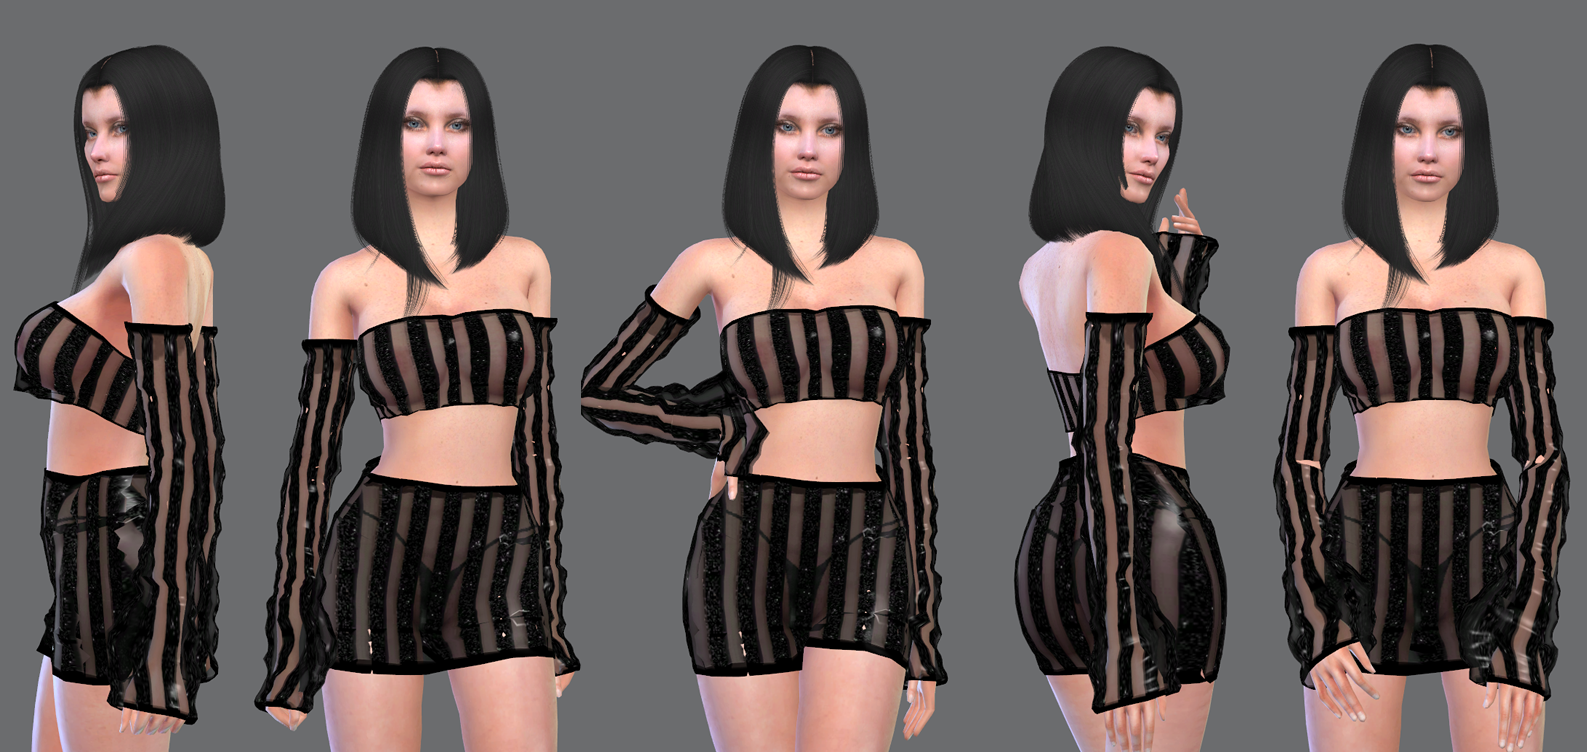 1522229457_skinsthesims4_fw.png.a43ec09bddfdf364d6e7faed643b75a5.png